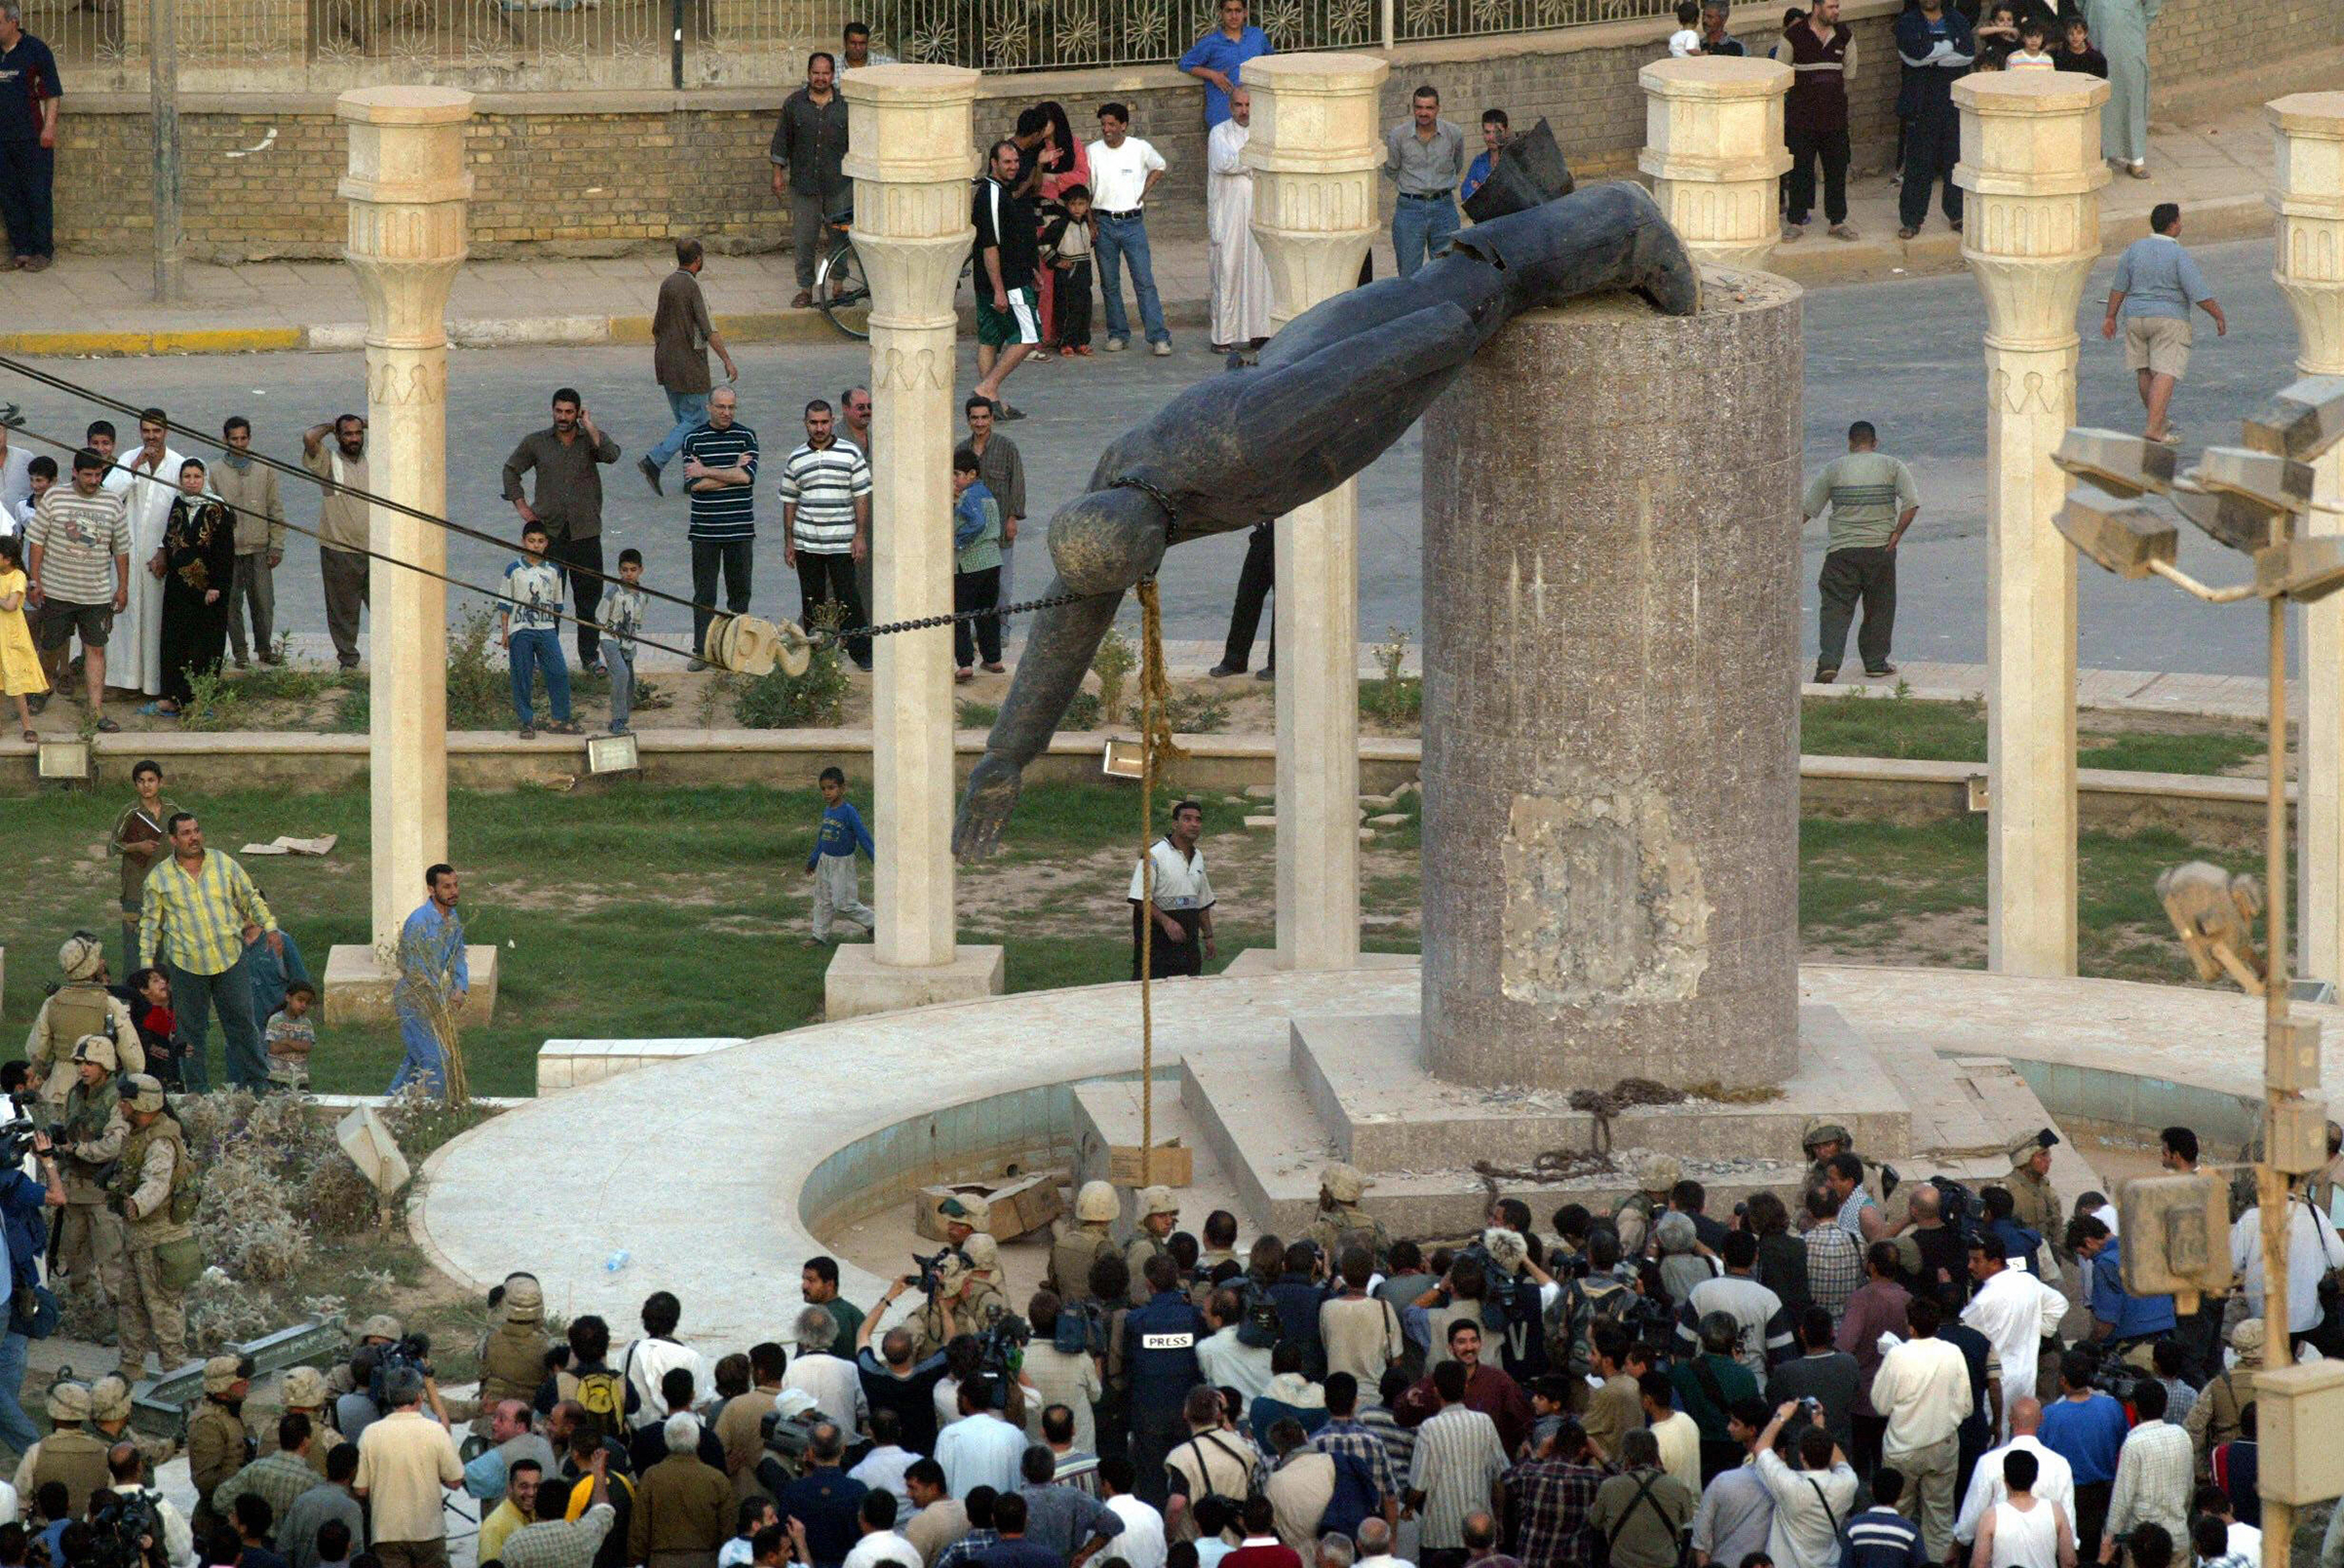 Iraqis watch a statue of Saddam Hussein falling in Baghdad on April 9, 20013. The ousted dictator was hanged in December 2006. (Patrick Baz—AFP/Getty Images)